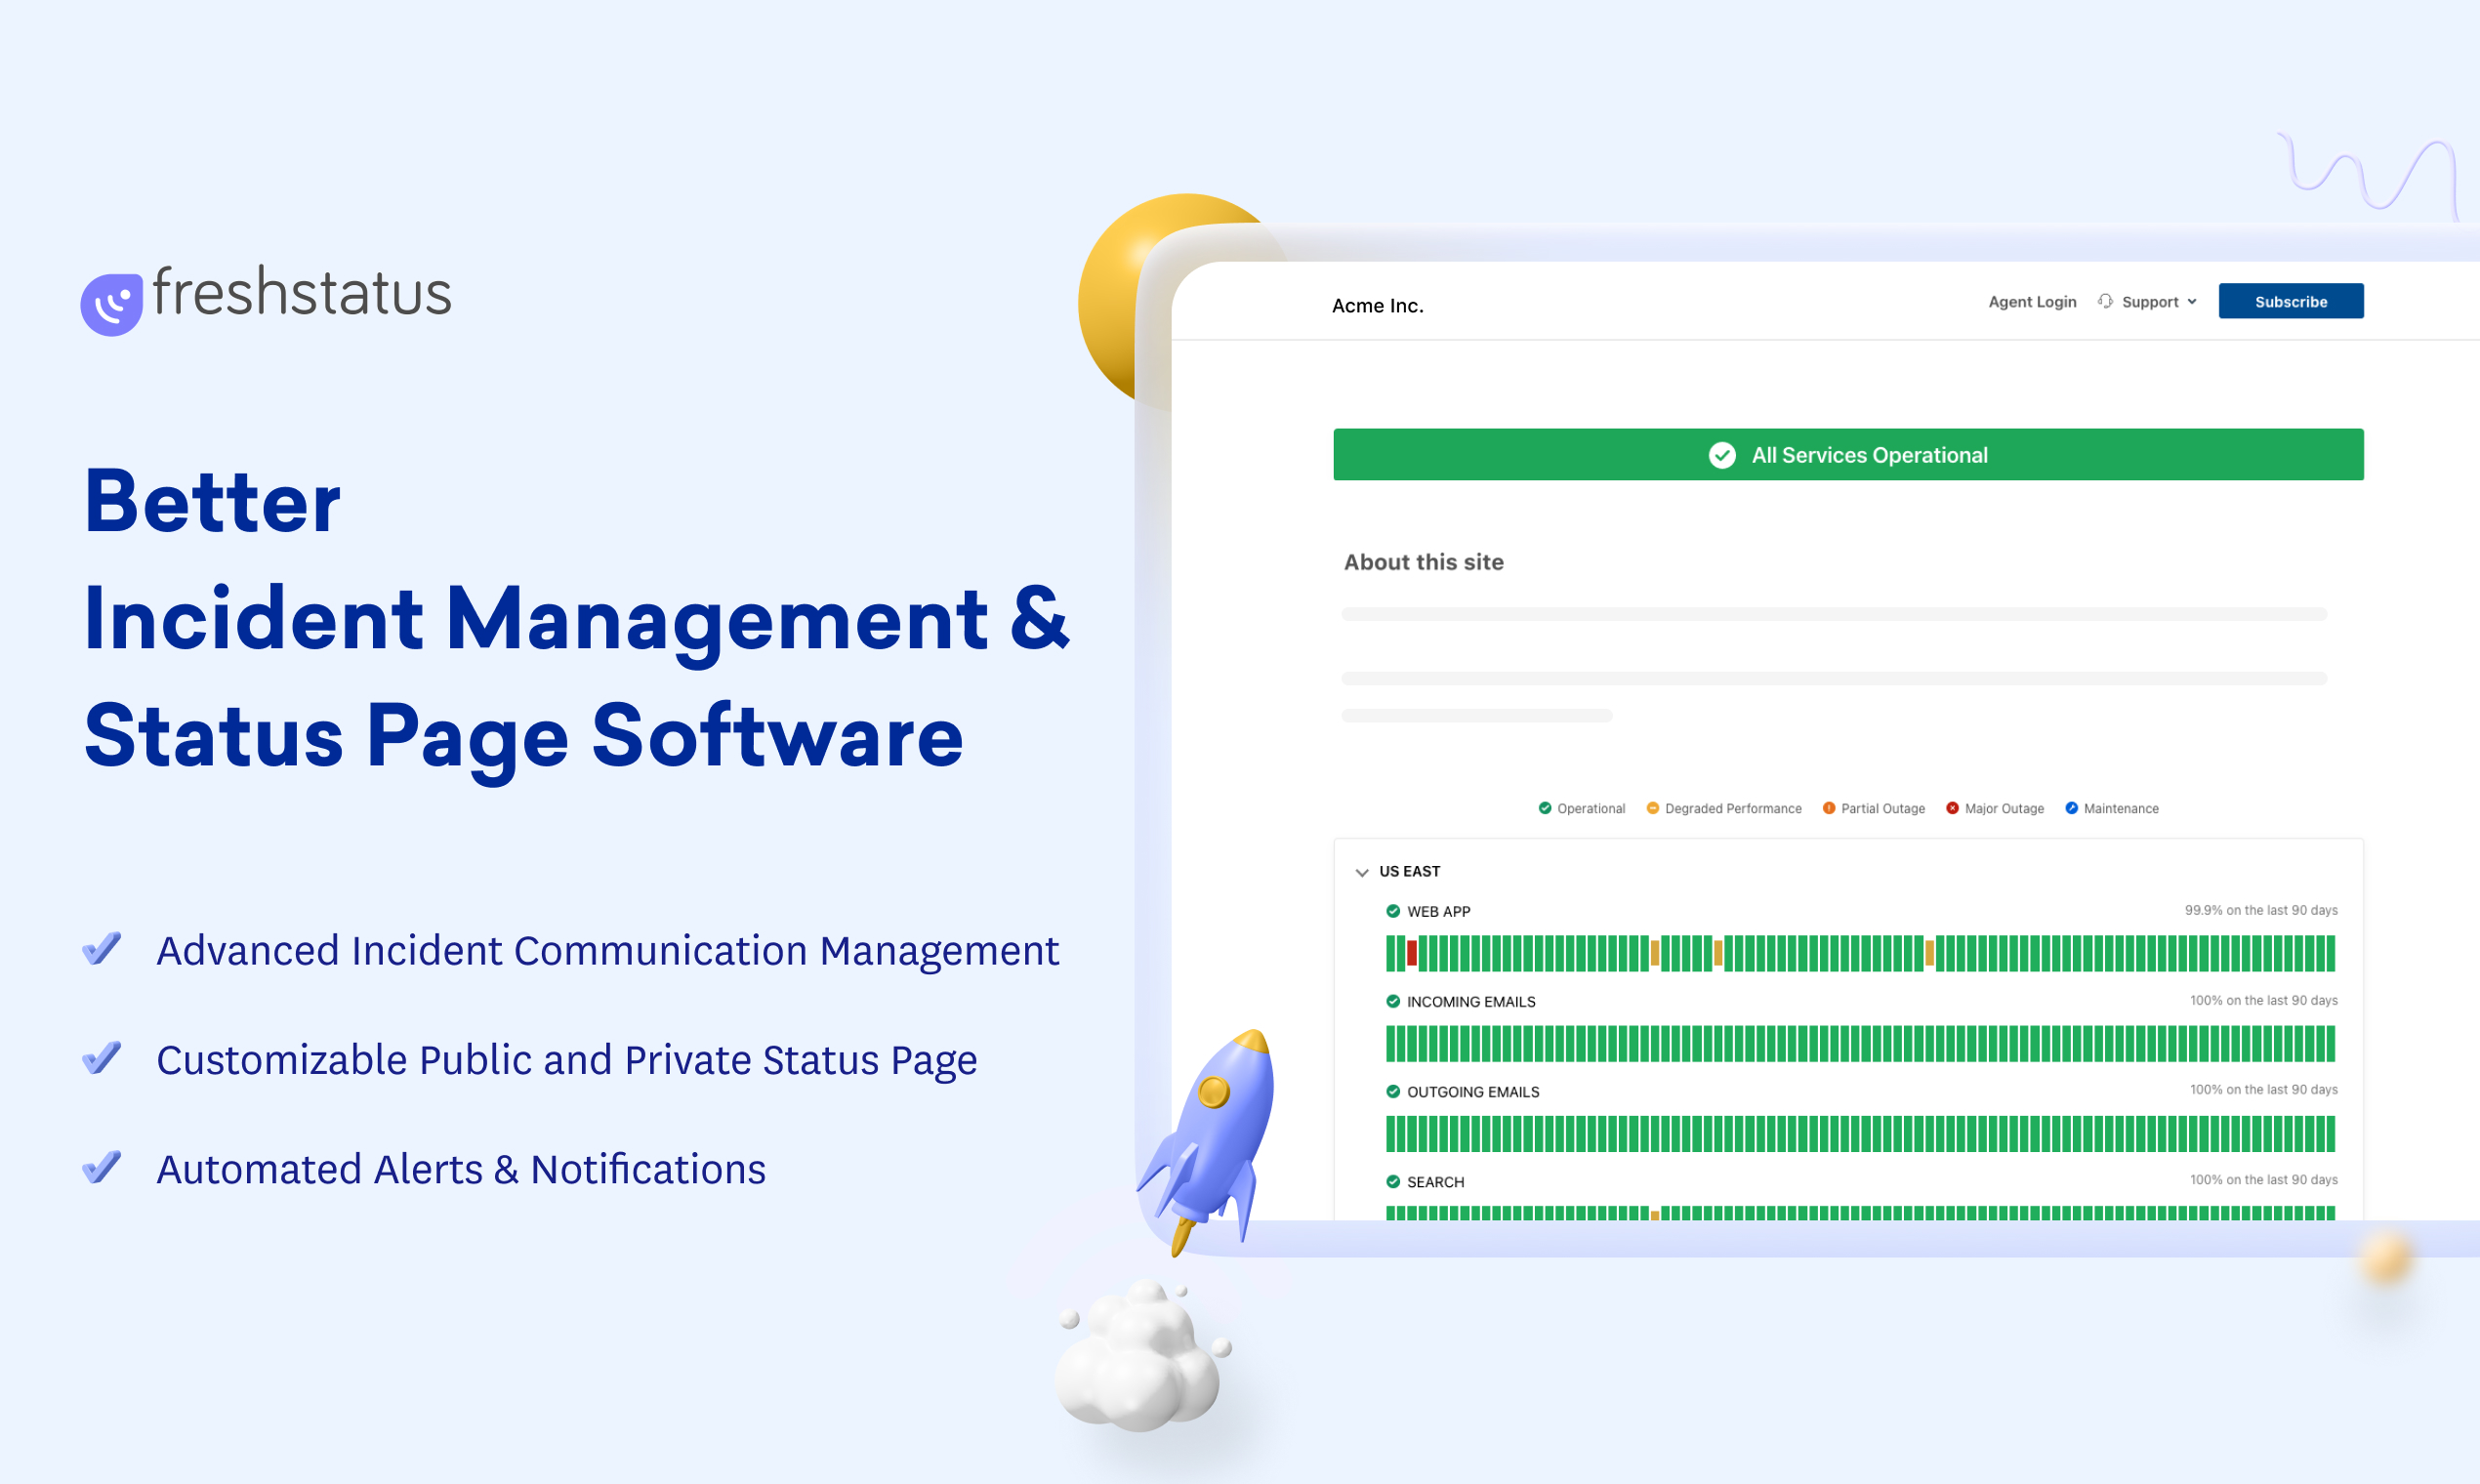 Better Incident Management & Status Page Software